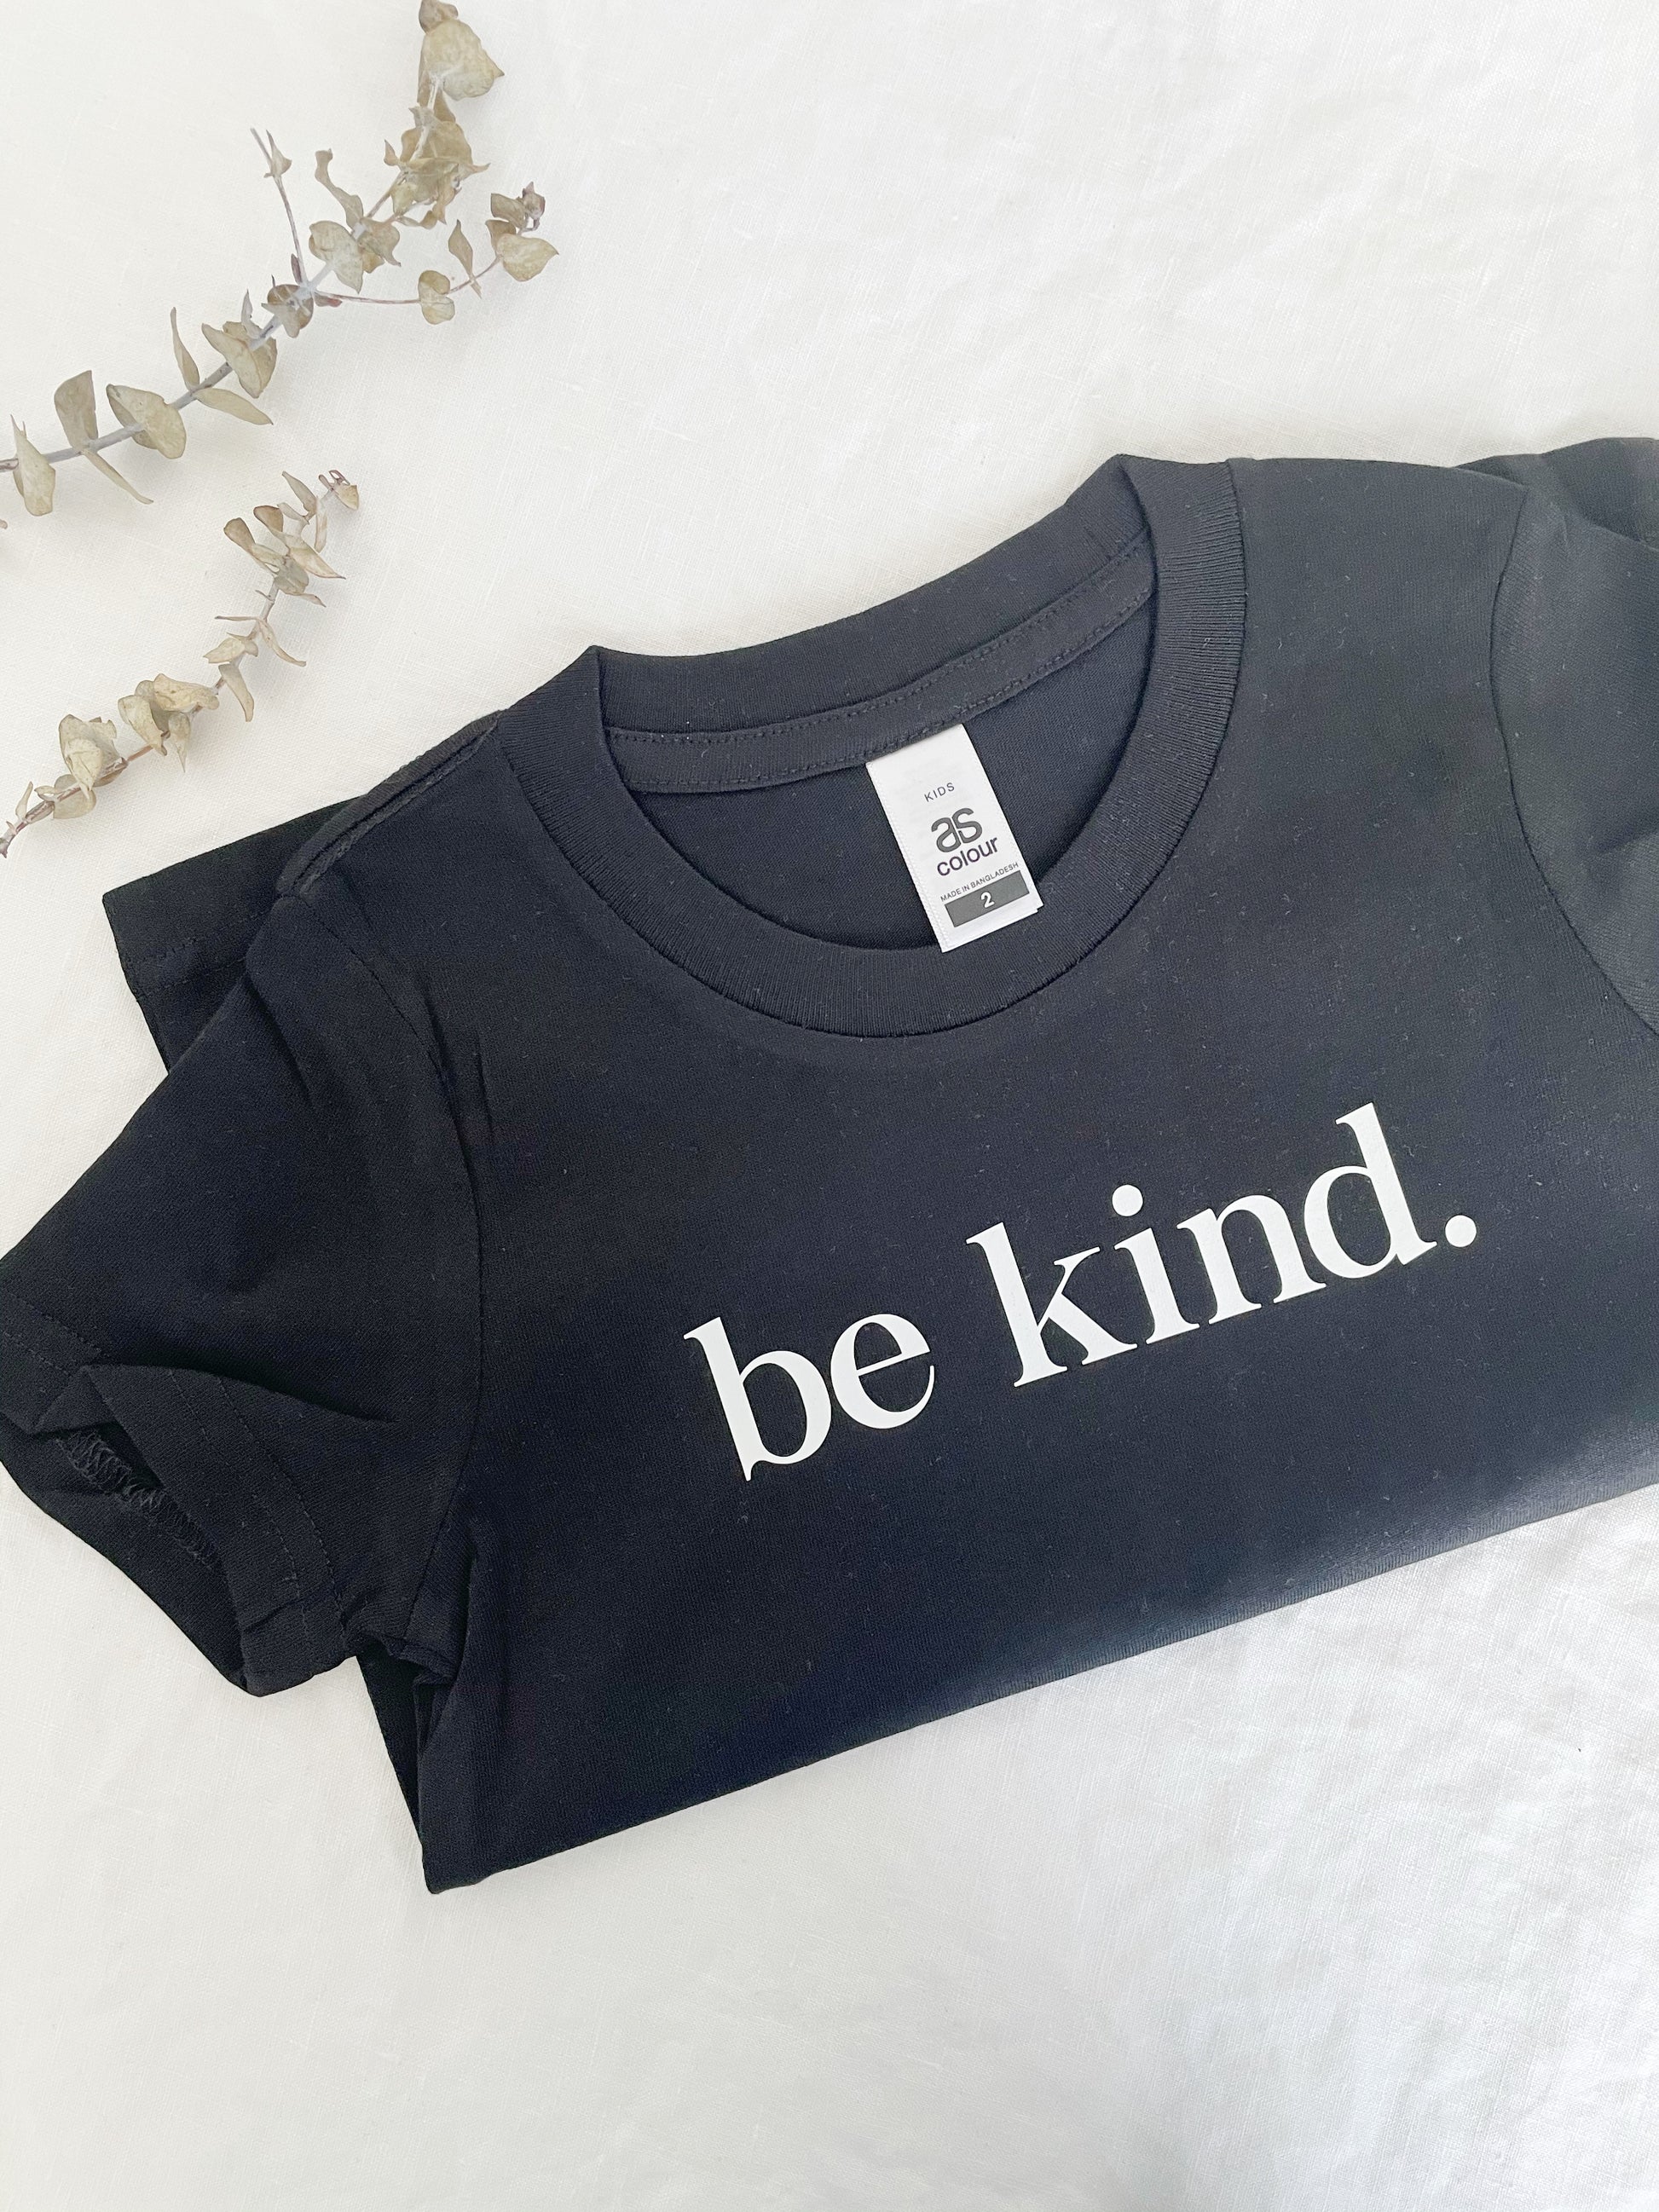 BE KIND KIDS T-SHIRT, BLACK WITH WHITE